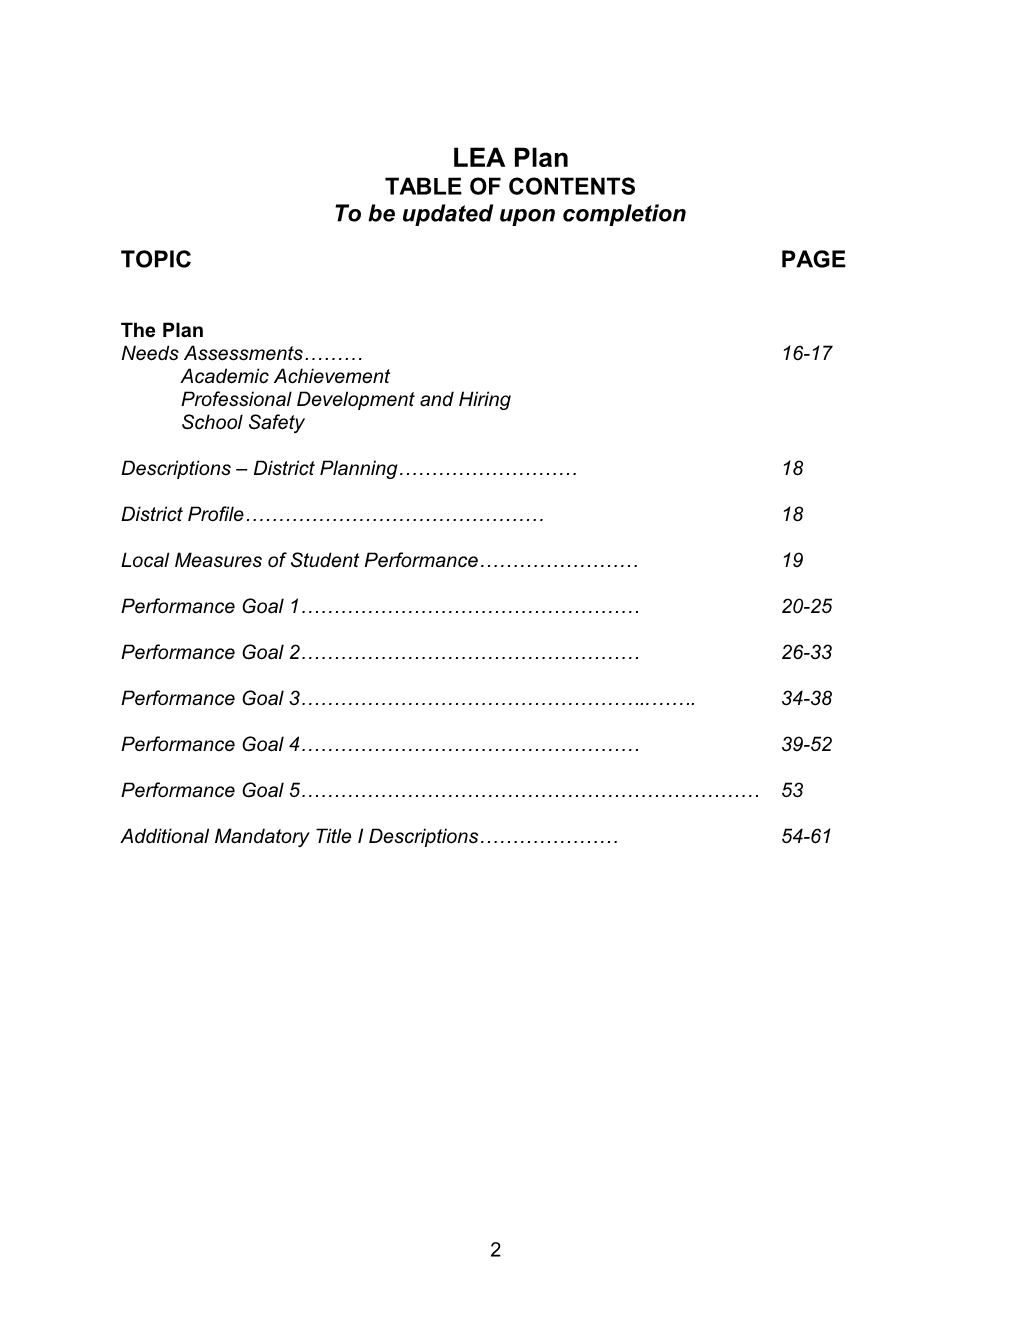 LEA Plan Template for Leas in PI Year 3 - Title I, Part A-Accountability (CA Dept of Education)